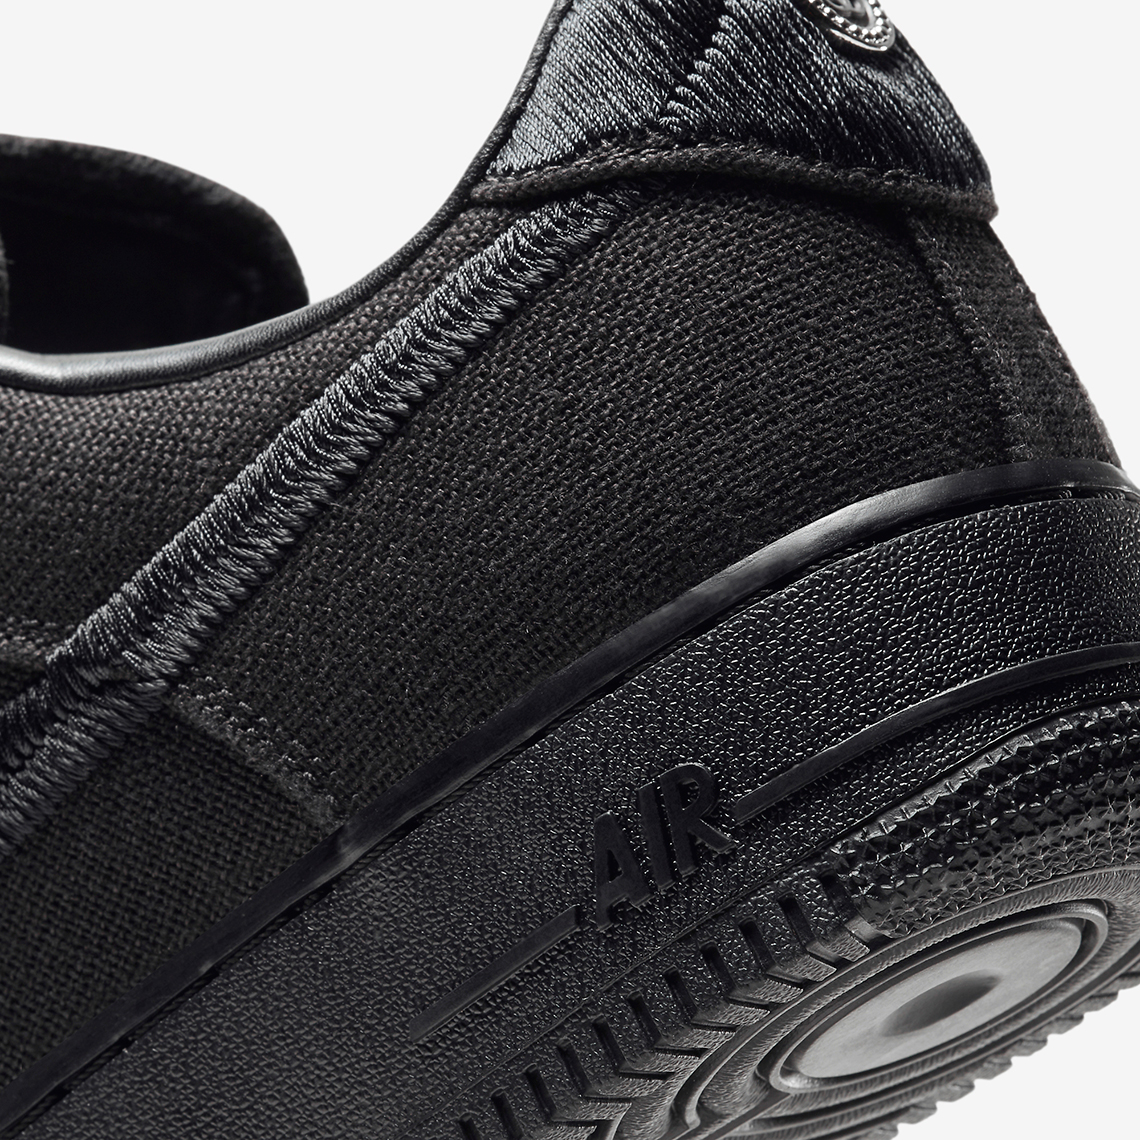 Stussy x Nike Air Force 1 Low Black Releasing Later This Year •